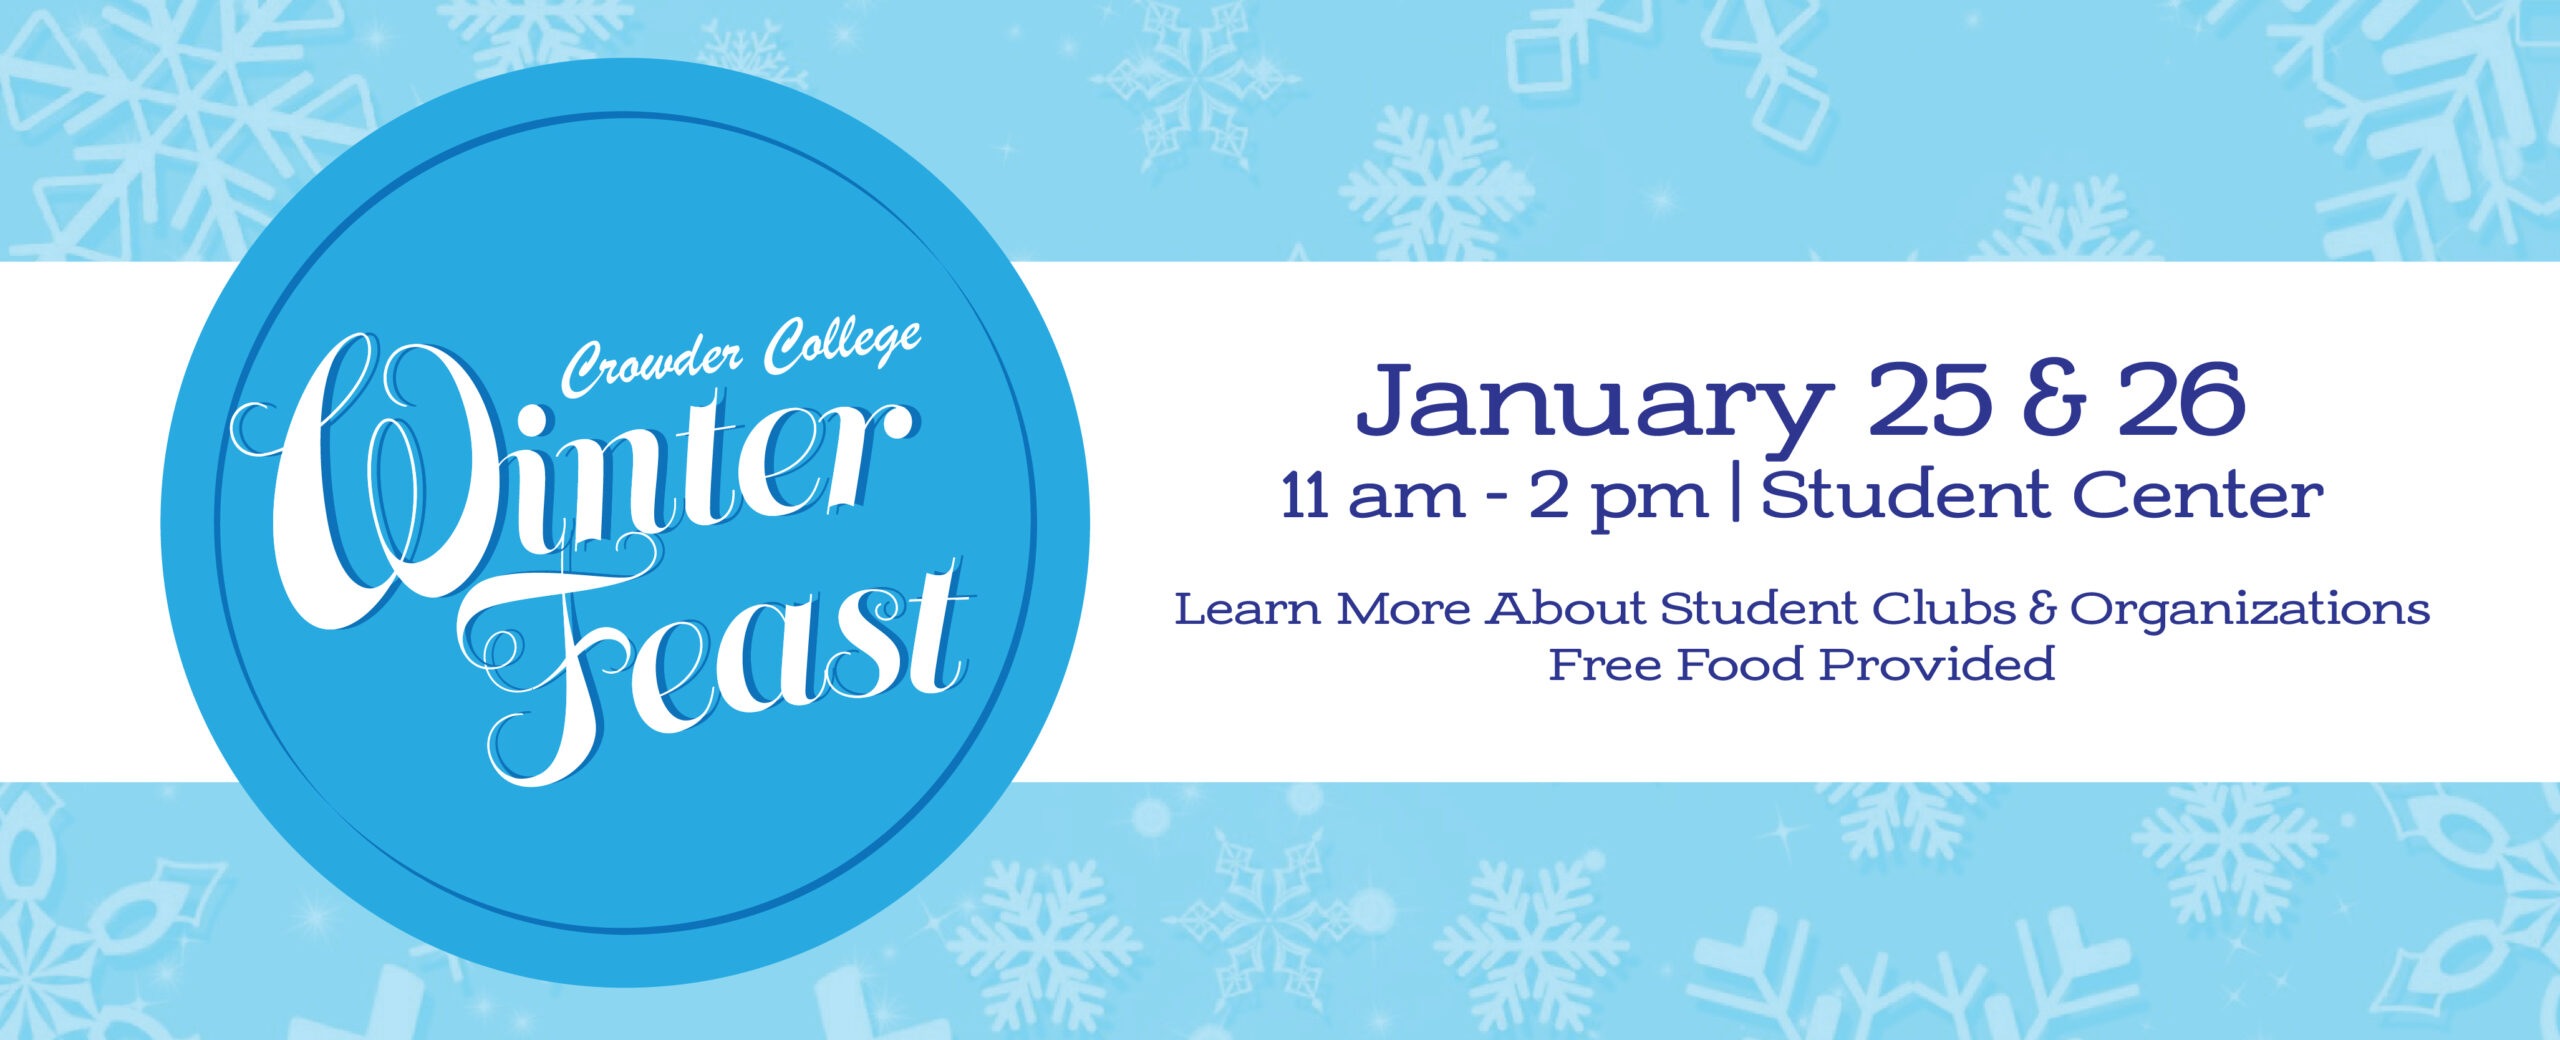 Learn more about Student Clubs & Organizations. Winter Feast. January 25 & 26. 11am - 2pm. Student Center.